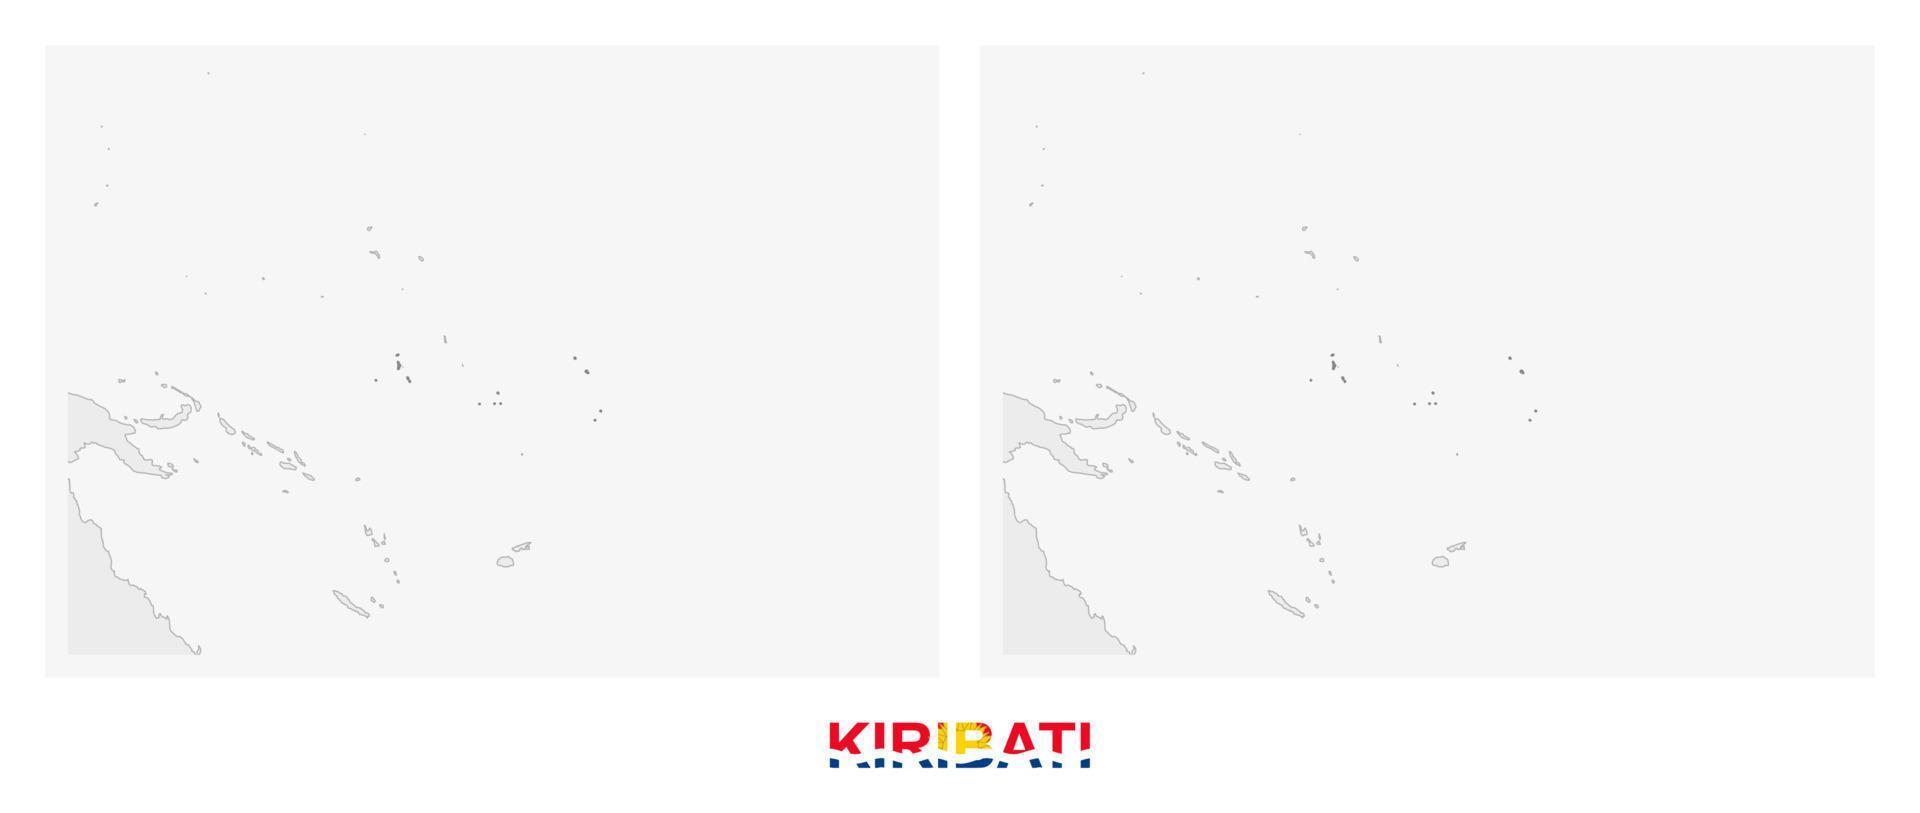 Two versions of the map of Kiribati, with the flag of Kiribati and highlighted in dark grey. vector